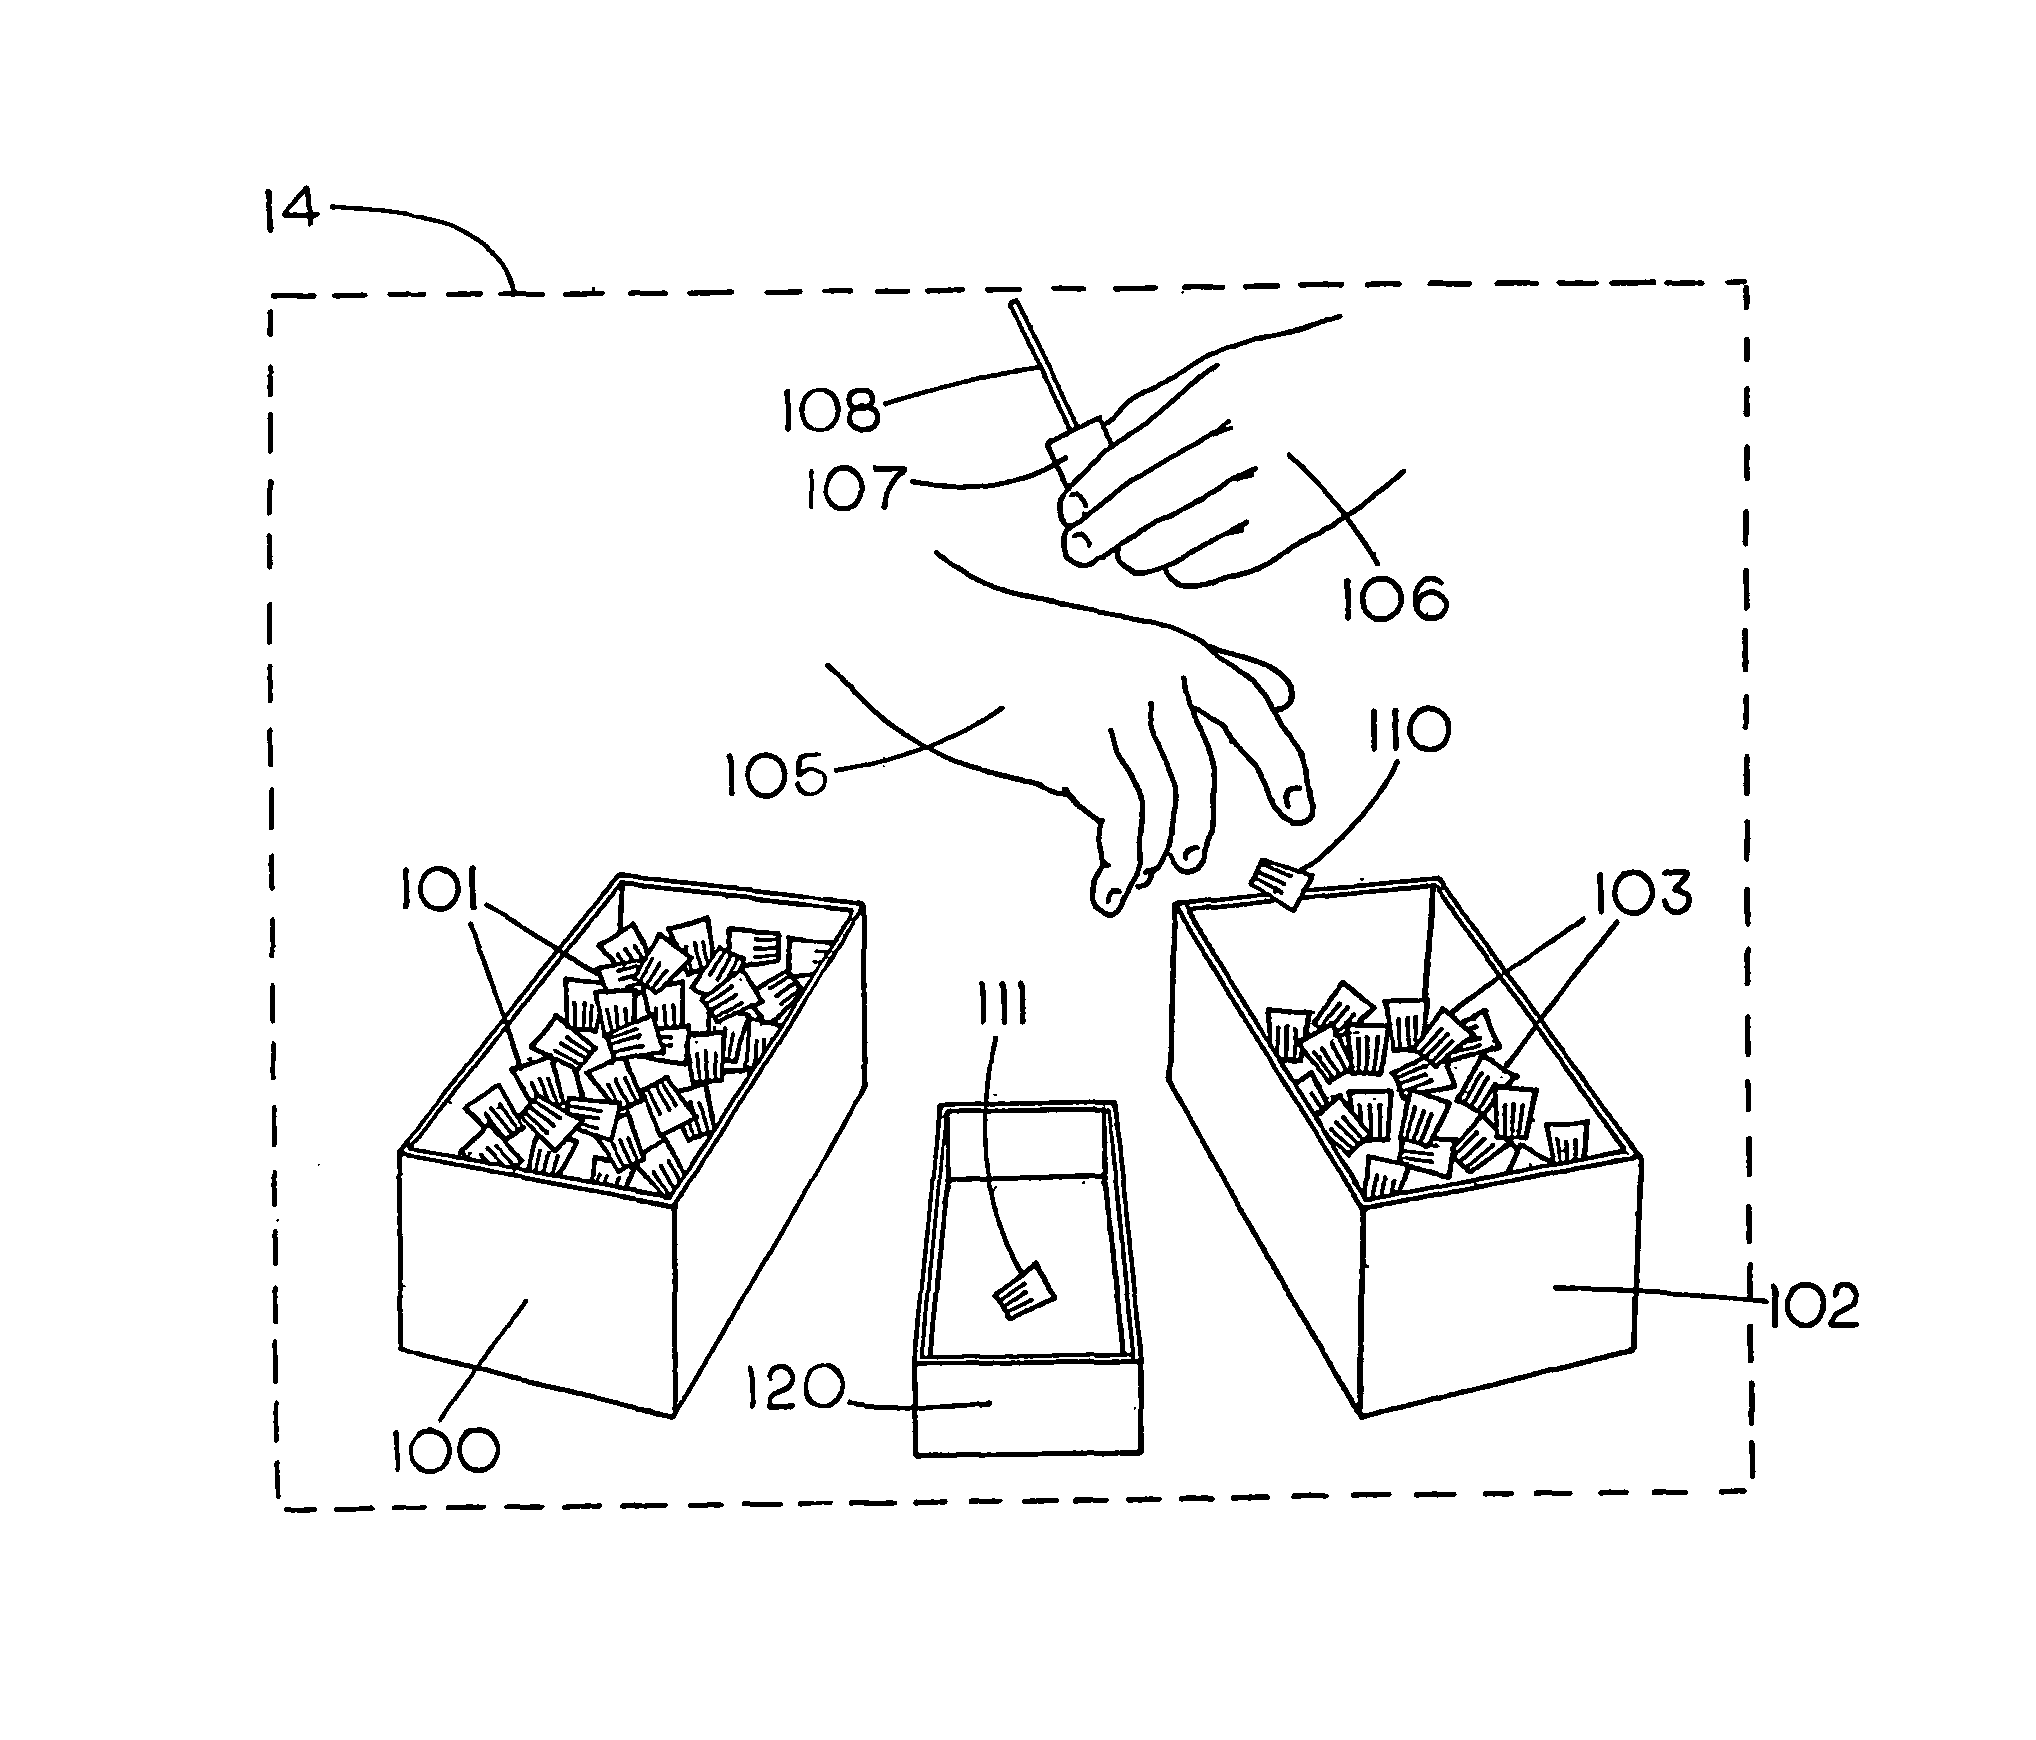 Assembling sealant containing twist-on wire connectors